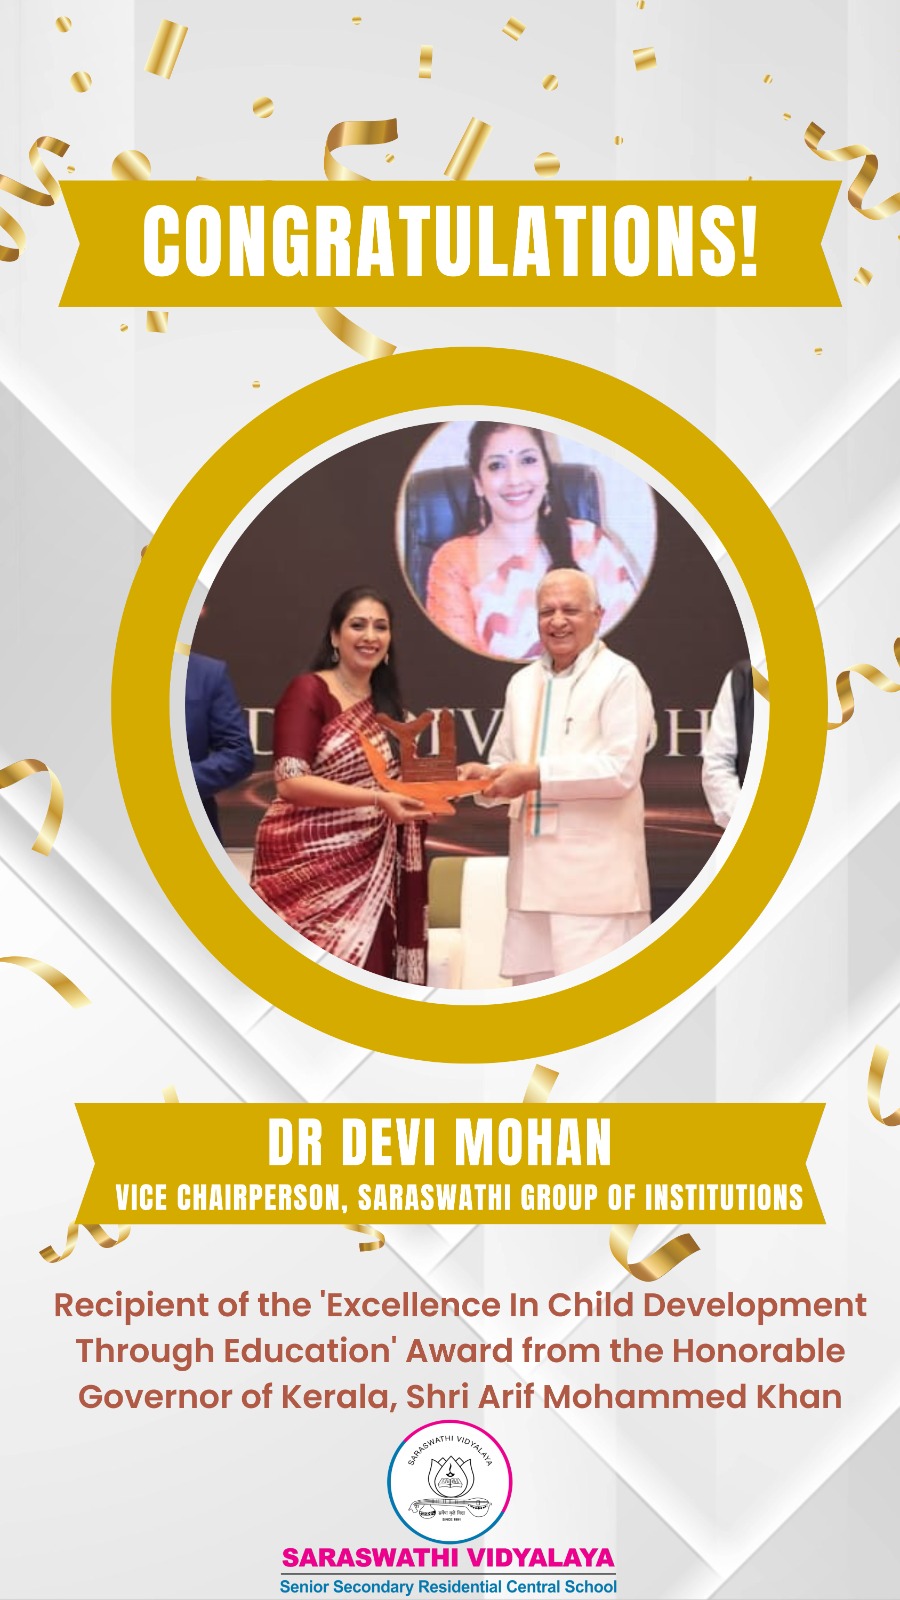 Recipient of Excellence In Child Development Through Education Award from the Honorable Governor of Kerala, Shri Arif Mohammed Khan